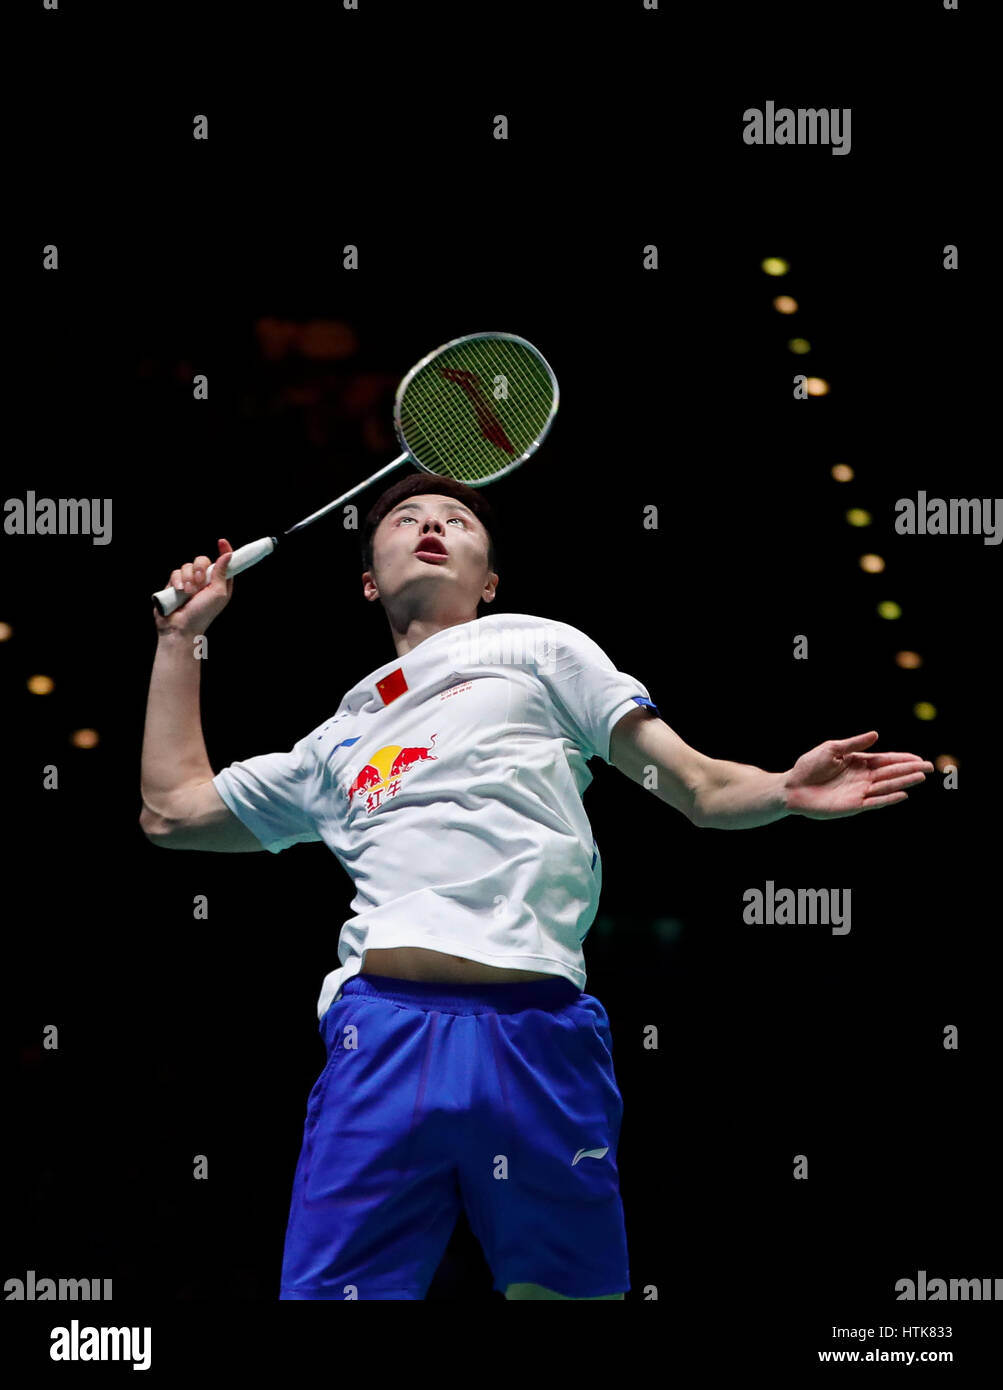 Birmingham. 12th Mar, 2017. Shi Yuqi of China competes during the men's singles final with Lee Chong Wei of Malaysia at All England Open Badminton Championships 2017 in Birmingham, Britain on March 12, 2017. Credit: Han Yan/Xinhua/Alamy Live News Stock Photo